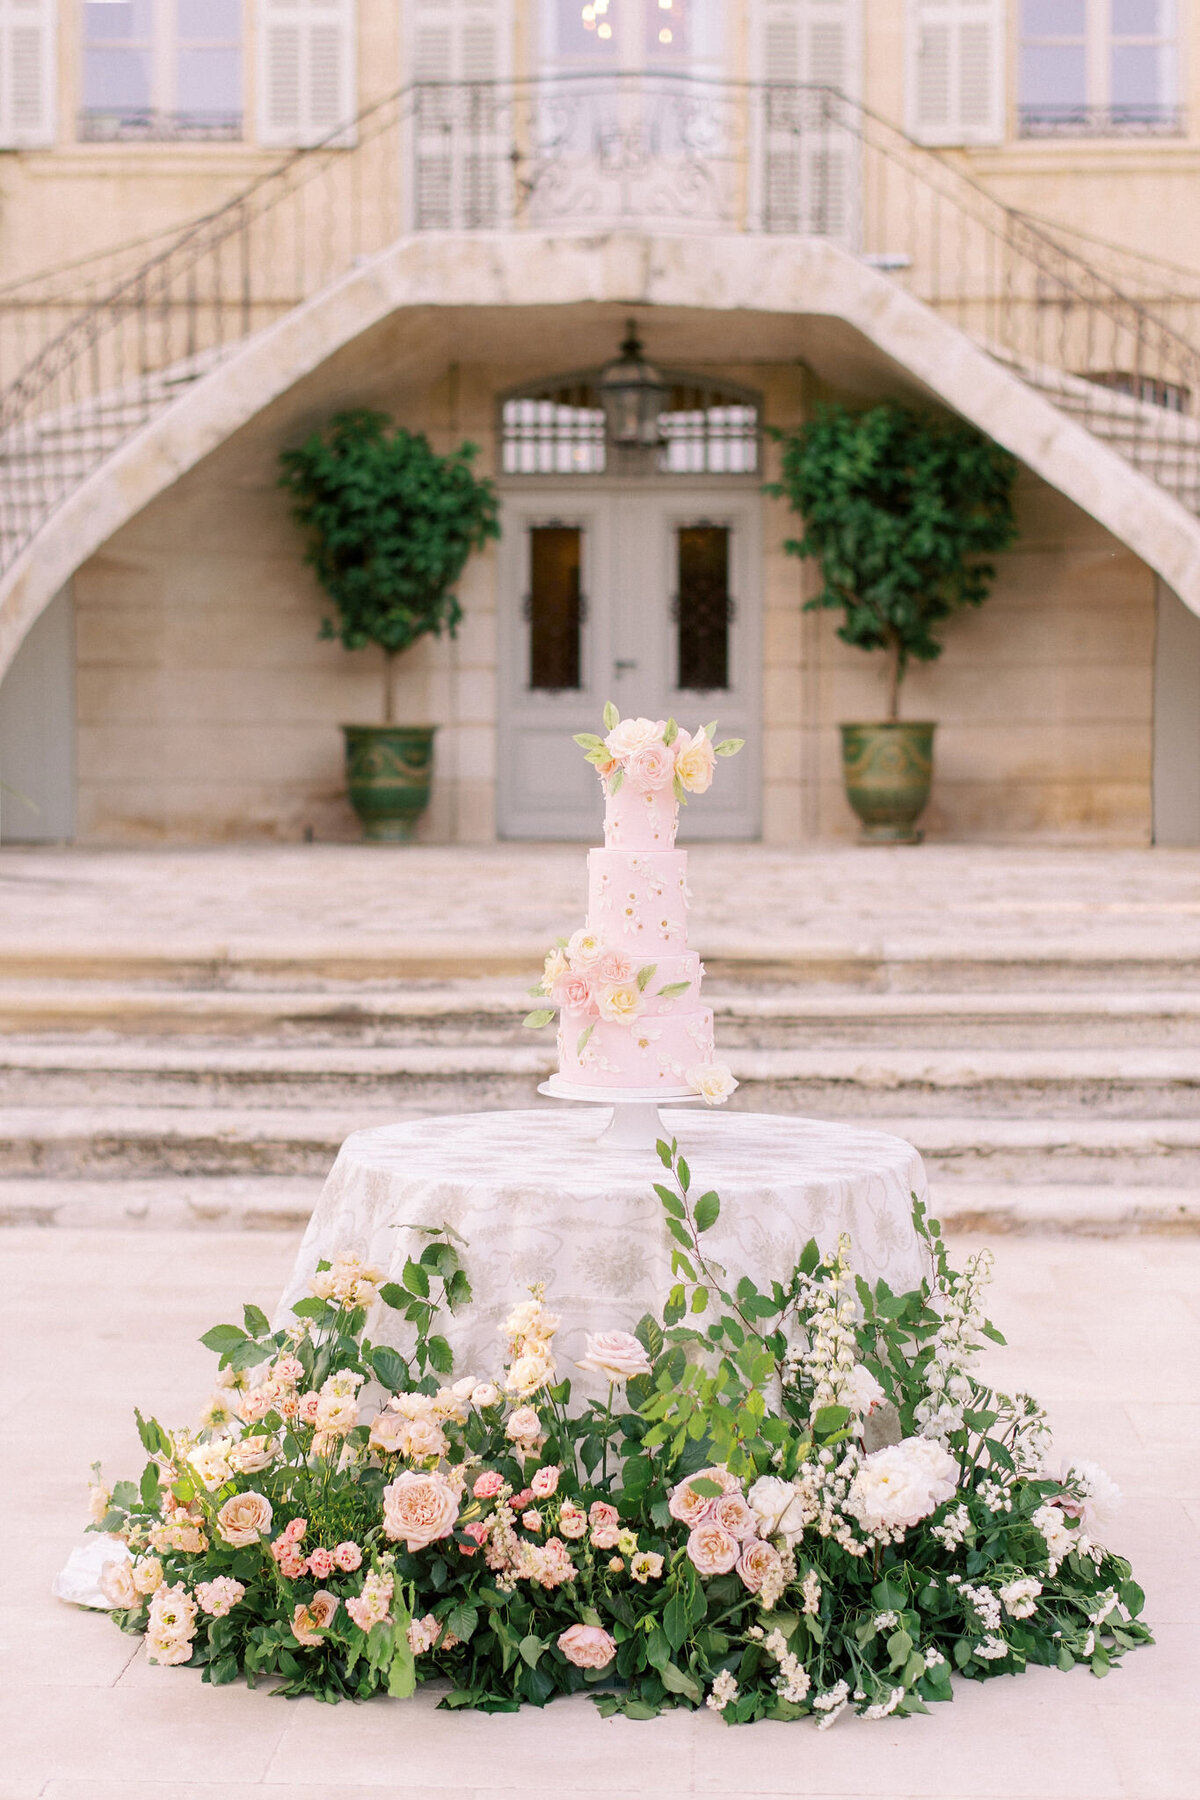 Jennifer Fox Weddings English speaking wedding planning & design agency in France crafting refined and bespoke weddings and celebrations Provence, Paris and destination MailysFortunePhotography_Jordan&Brian_19preview